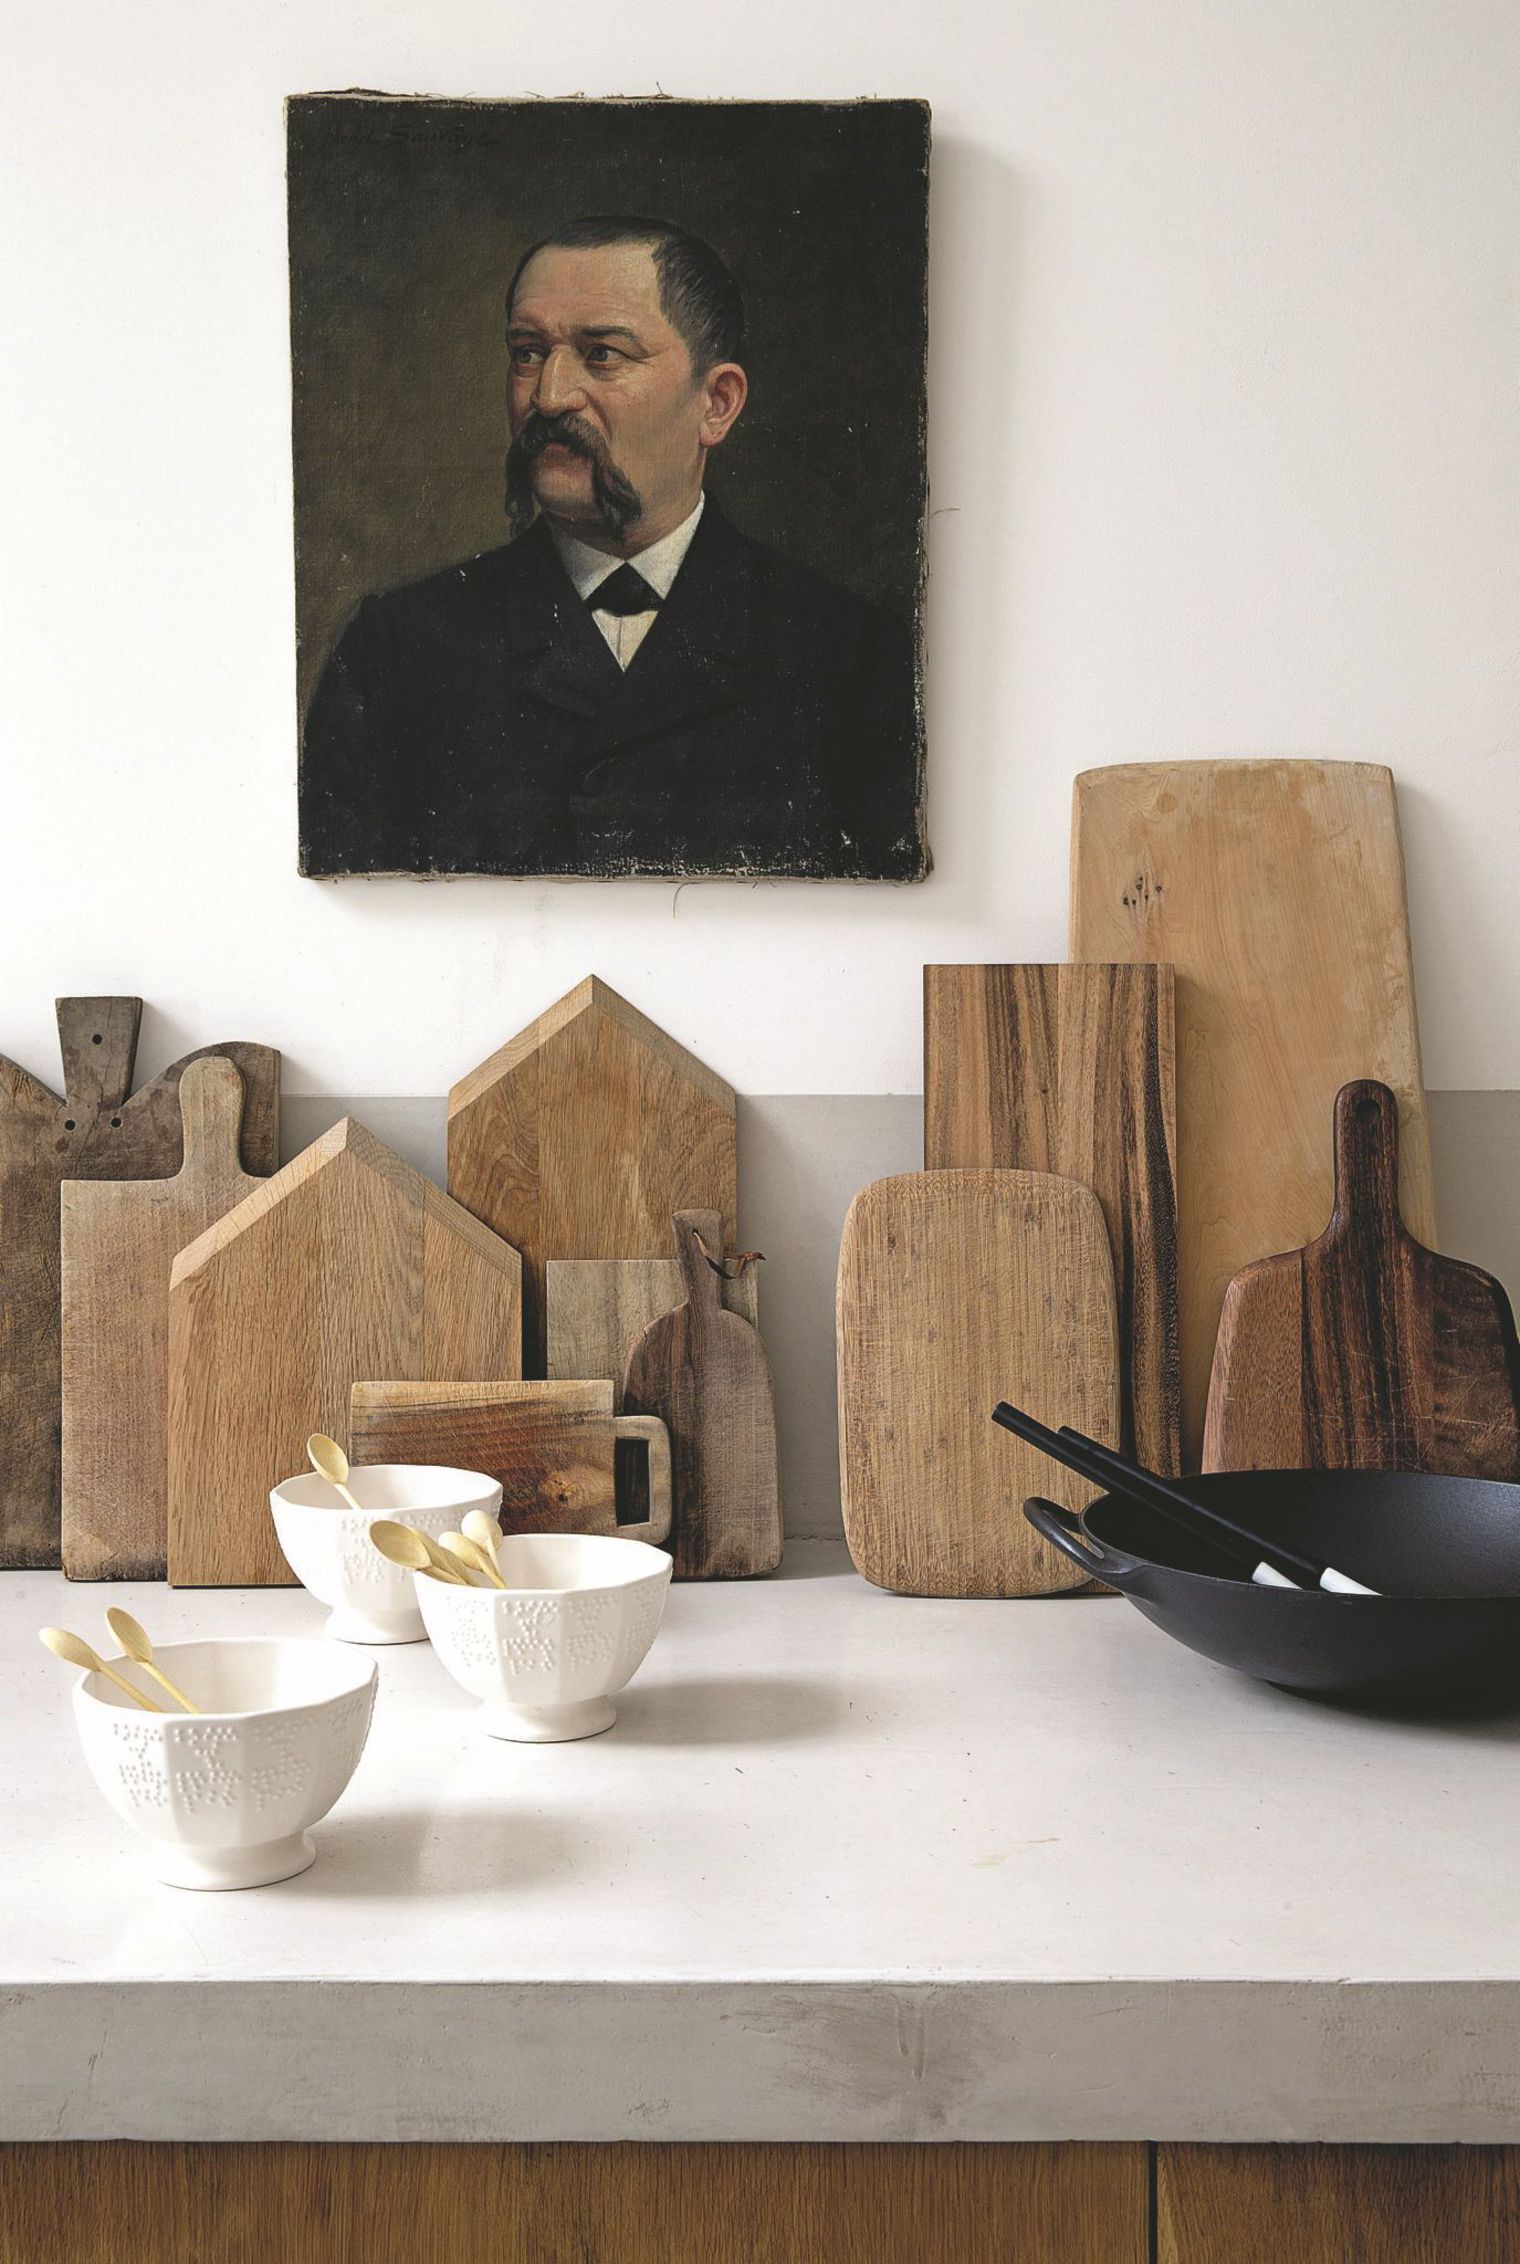 Small earthenware bowls Fried, vintage boards and Ferm Living